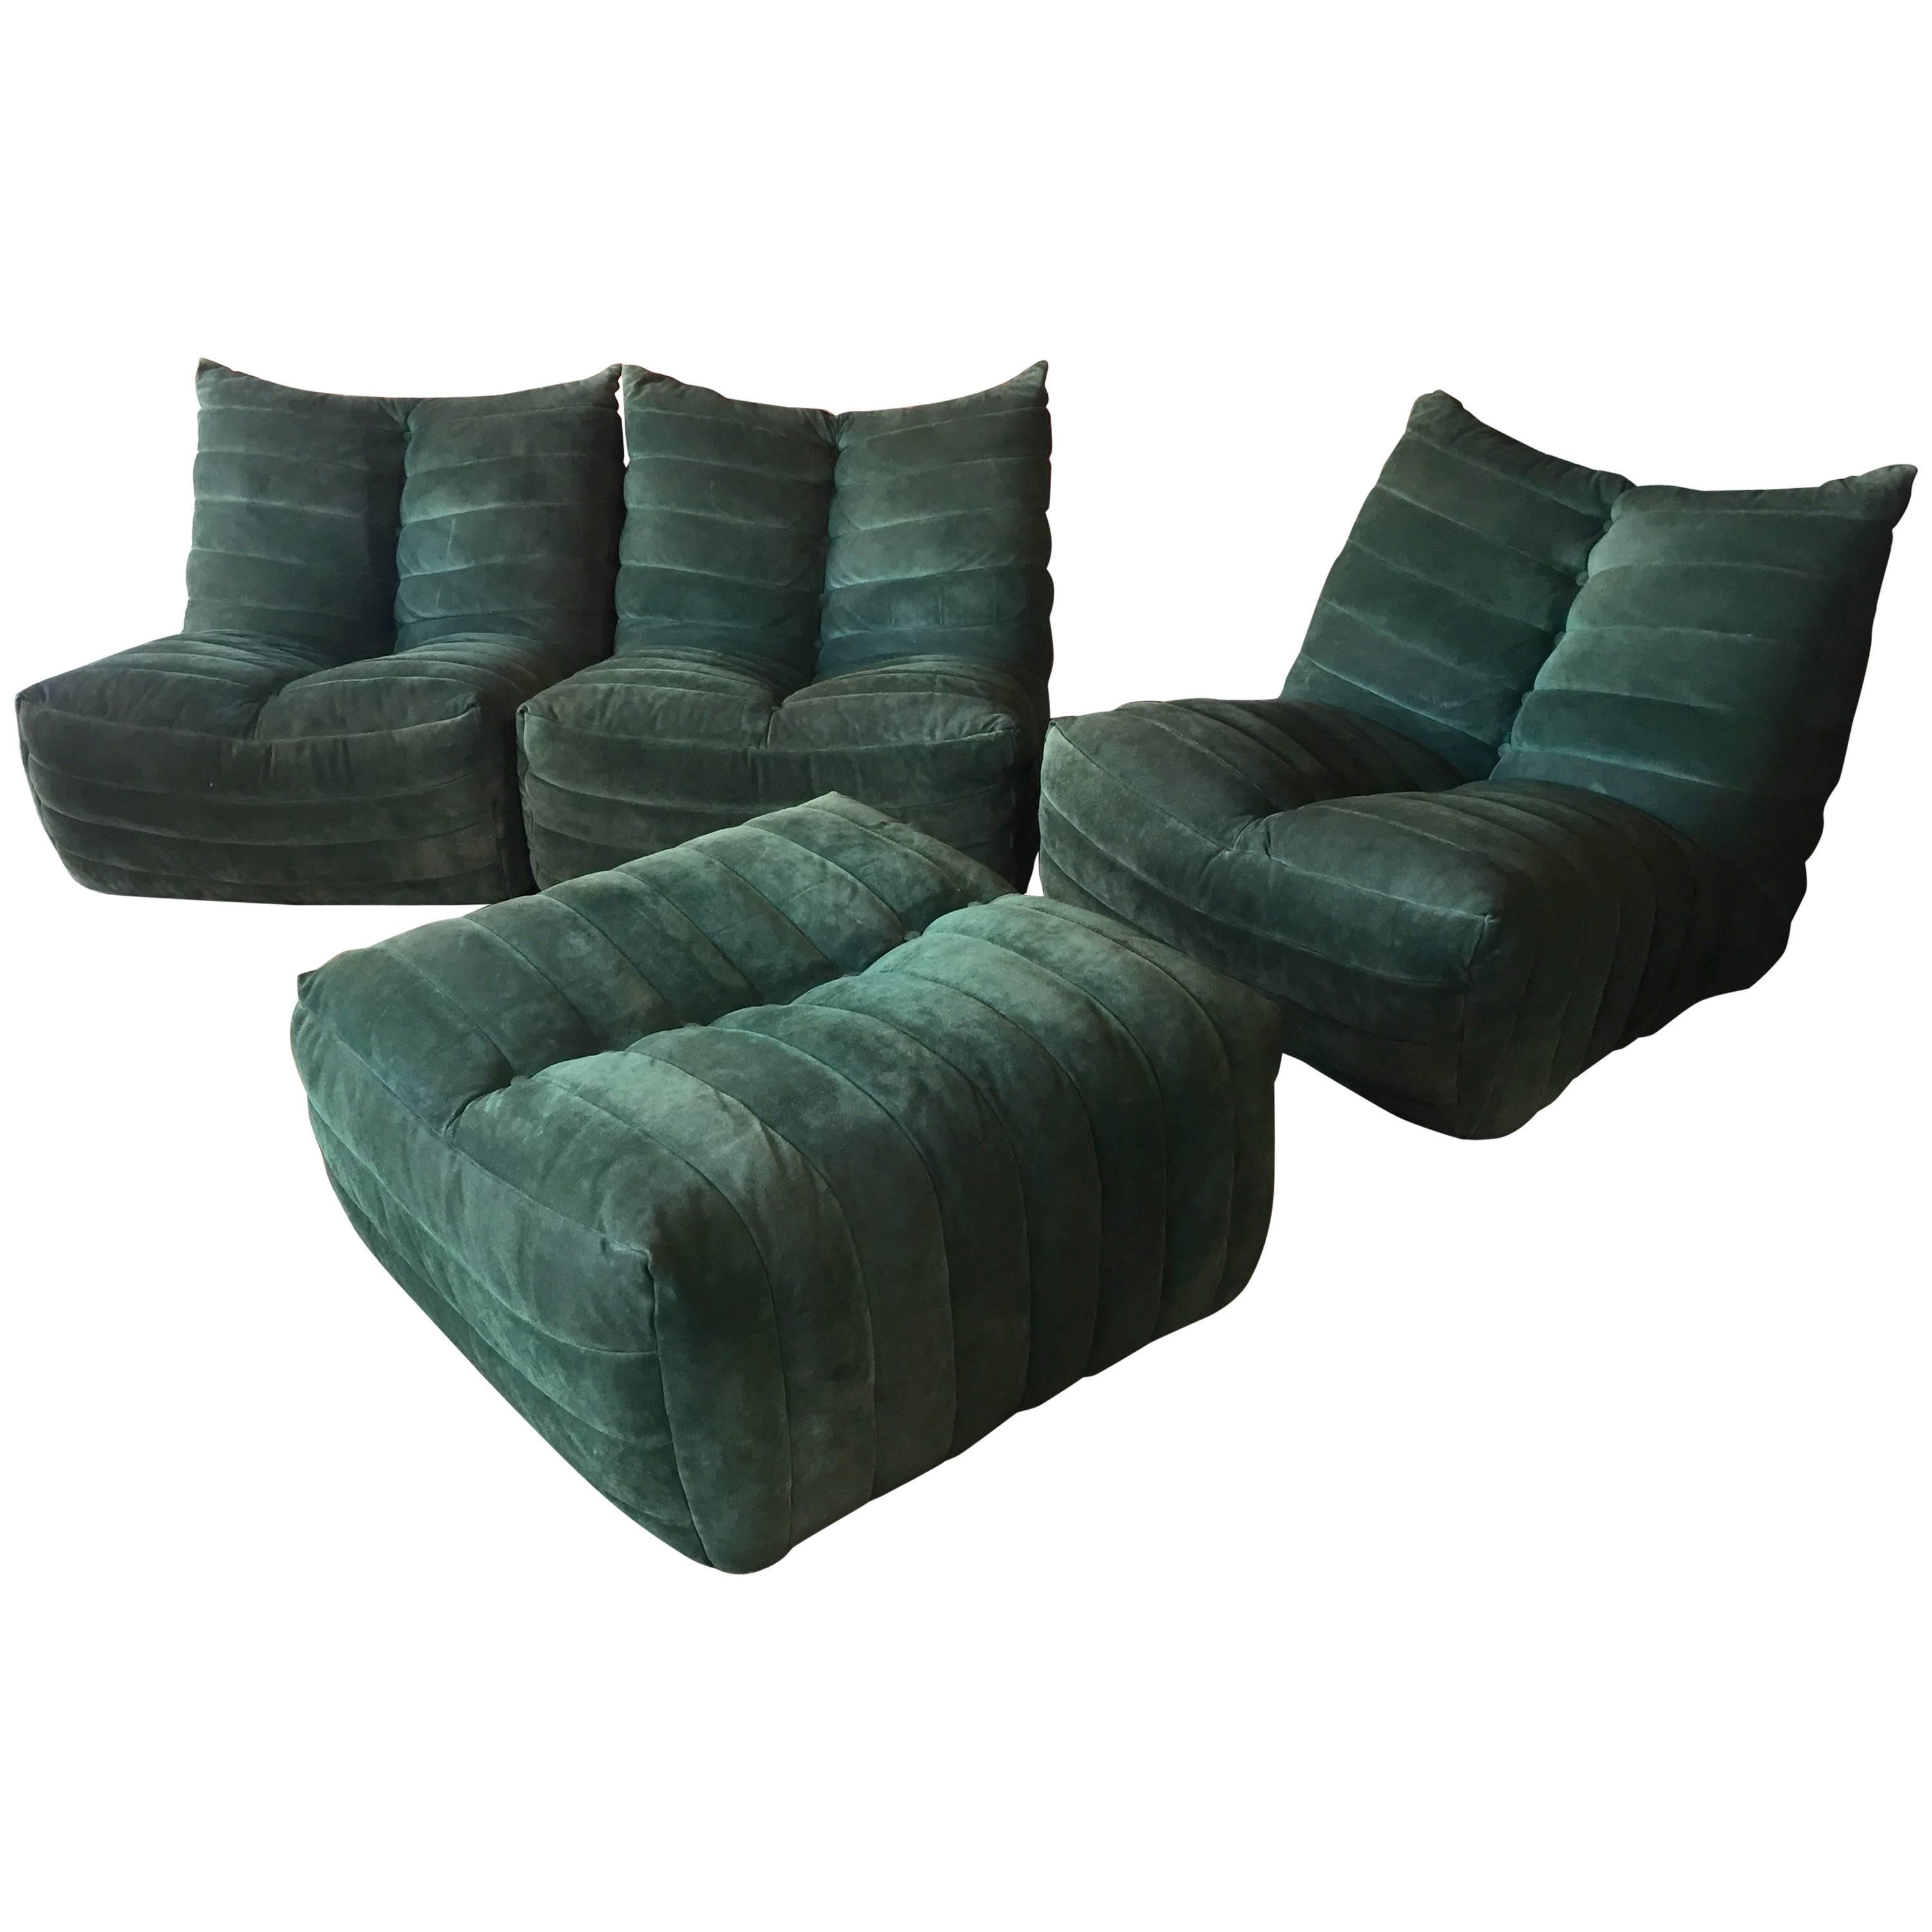 Modular Green Sectional Sofa "Giannone" by Arch. G.Grignani for 7Salotti, Italy